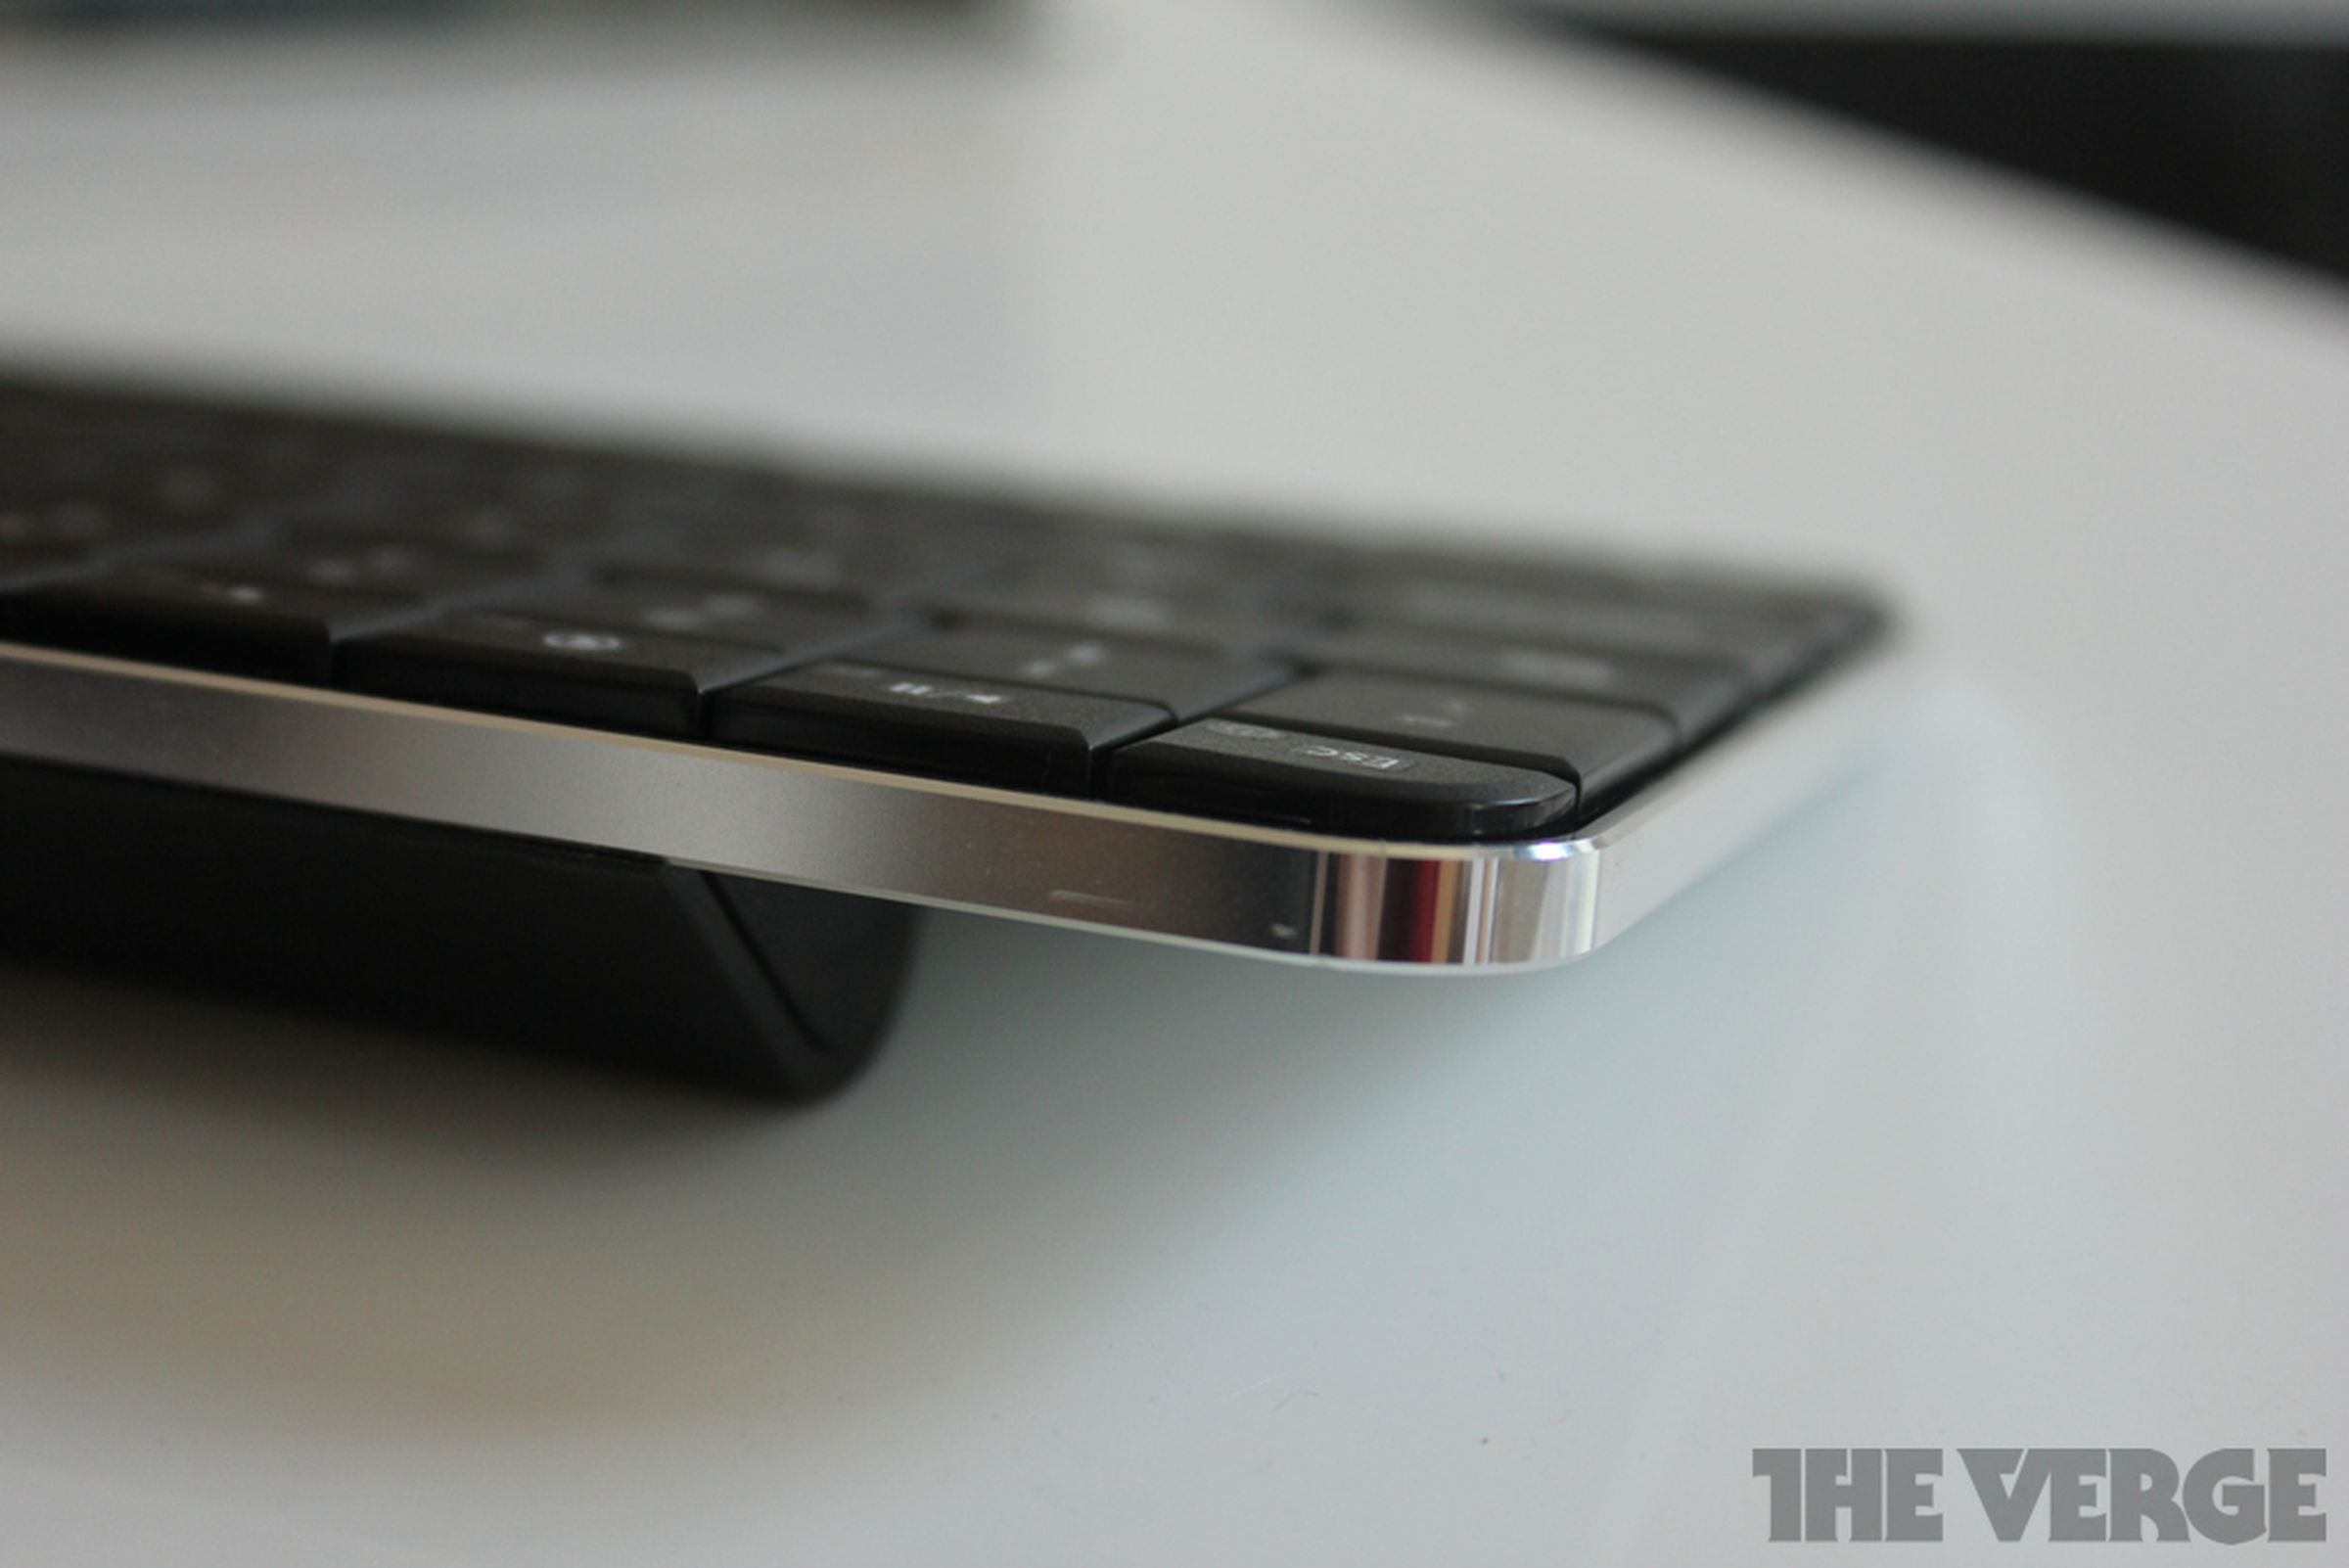 Microsoft Wedge Touch Mouse and Mobile Keyboard